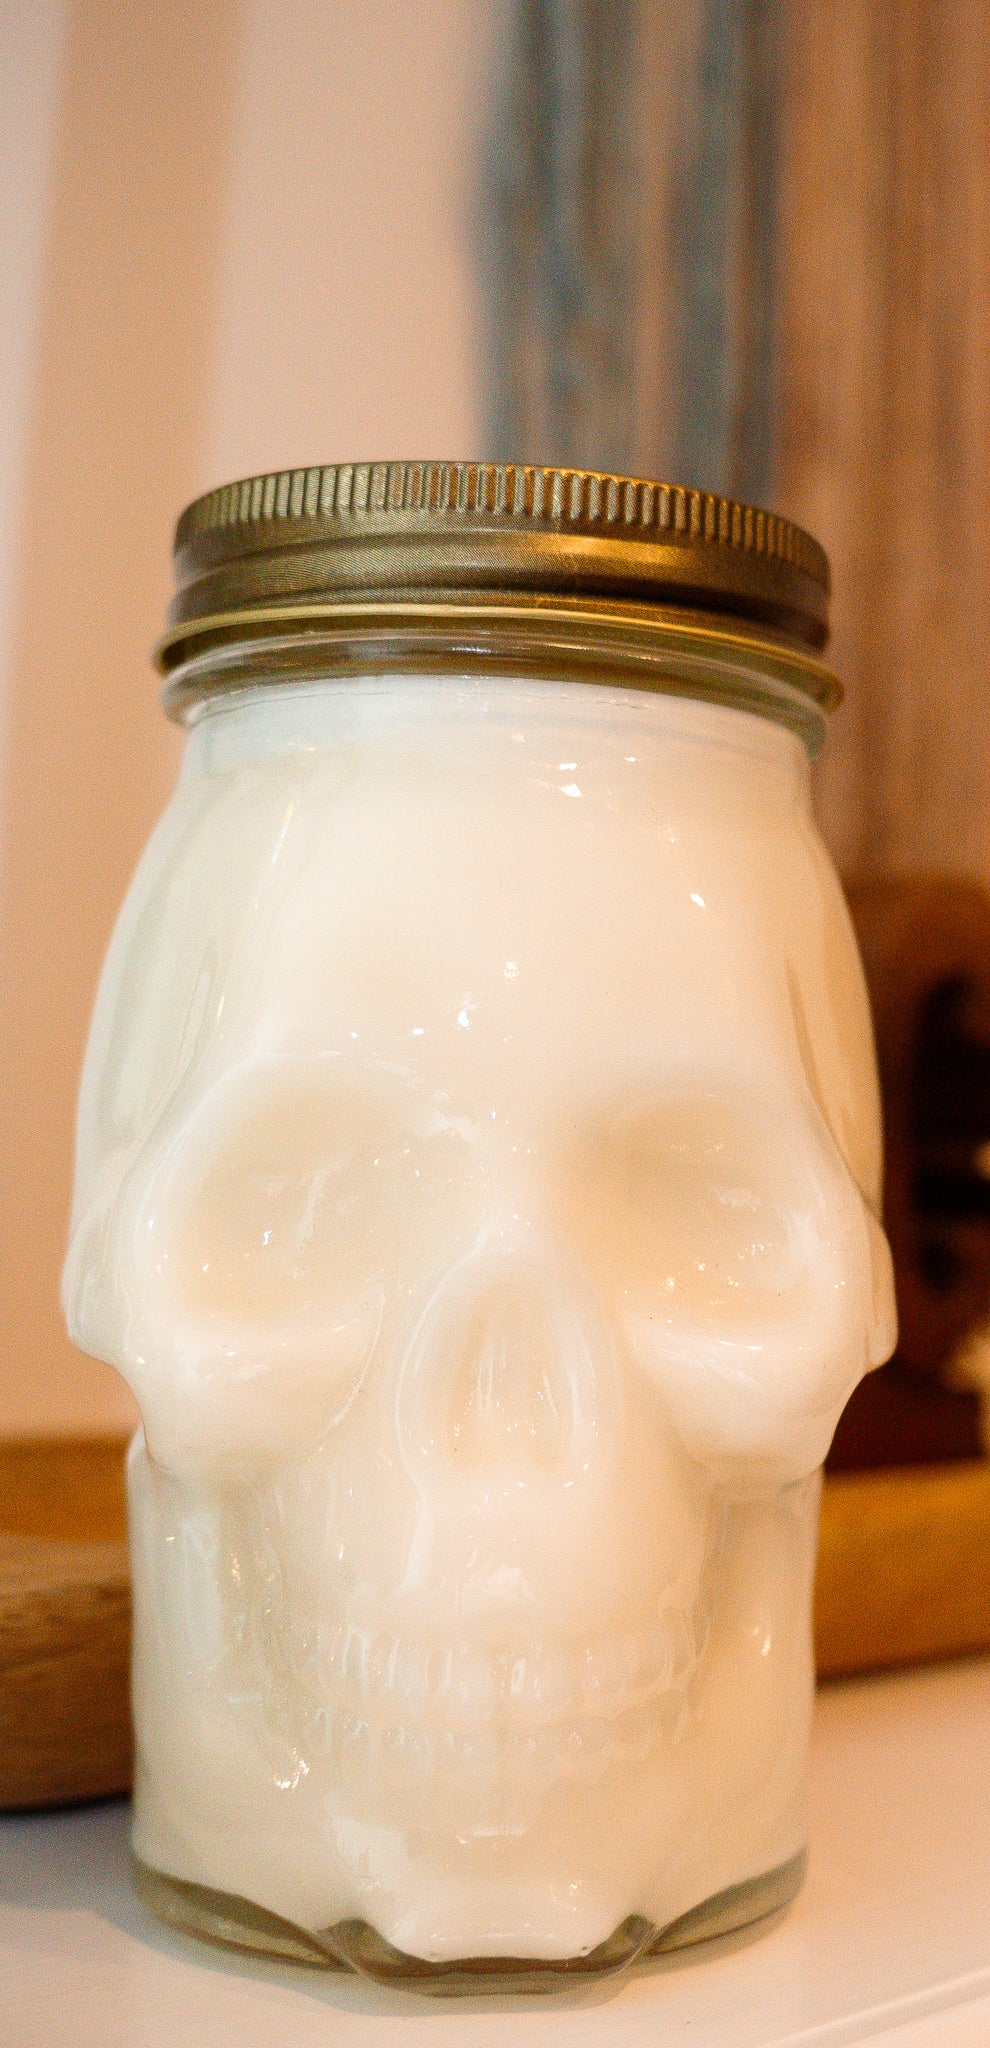 Twilight Woods scented Skull Candle